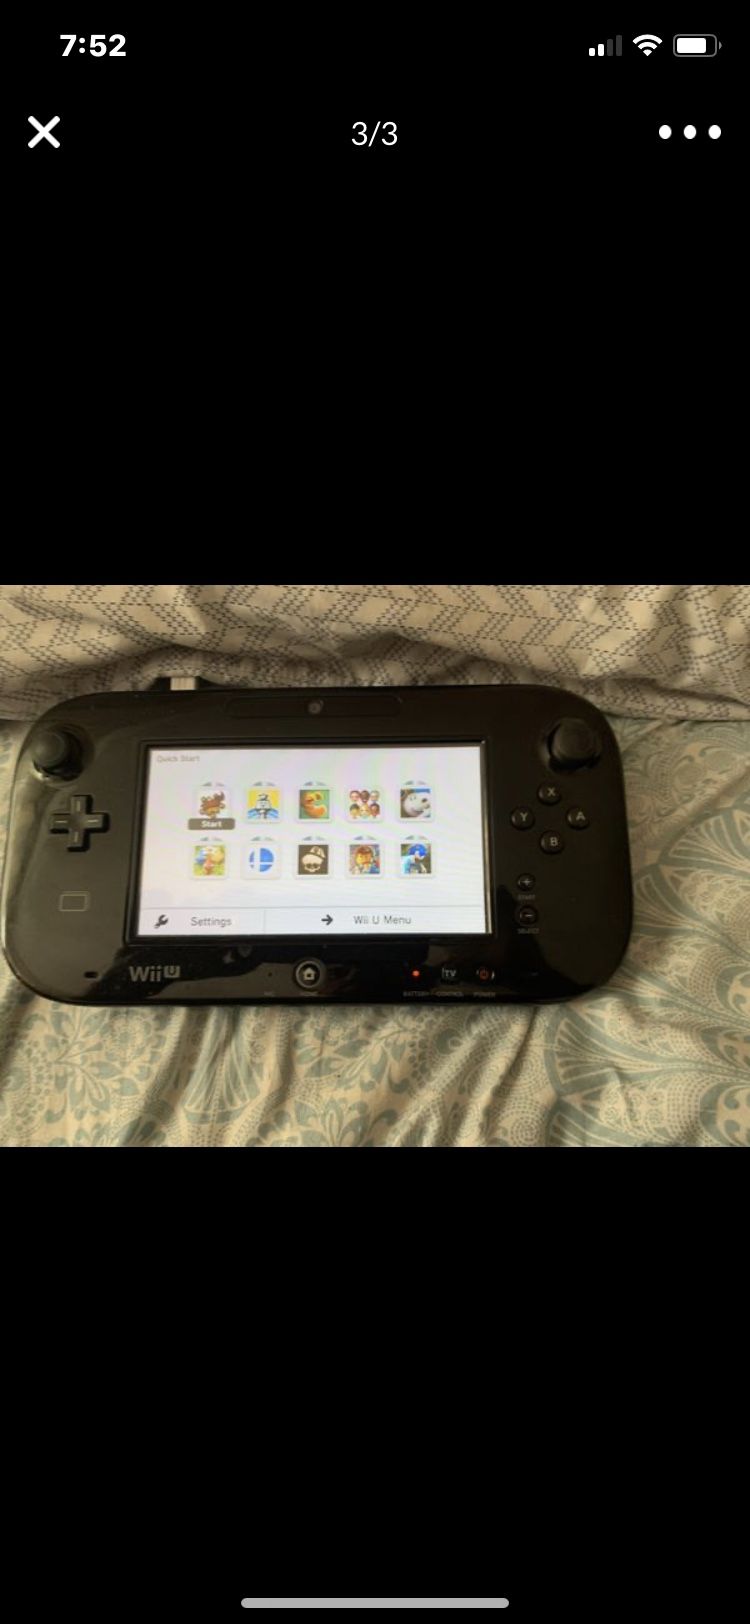 Nintendo Wii U in great condition with 10 games